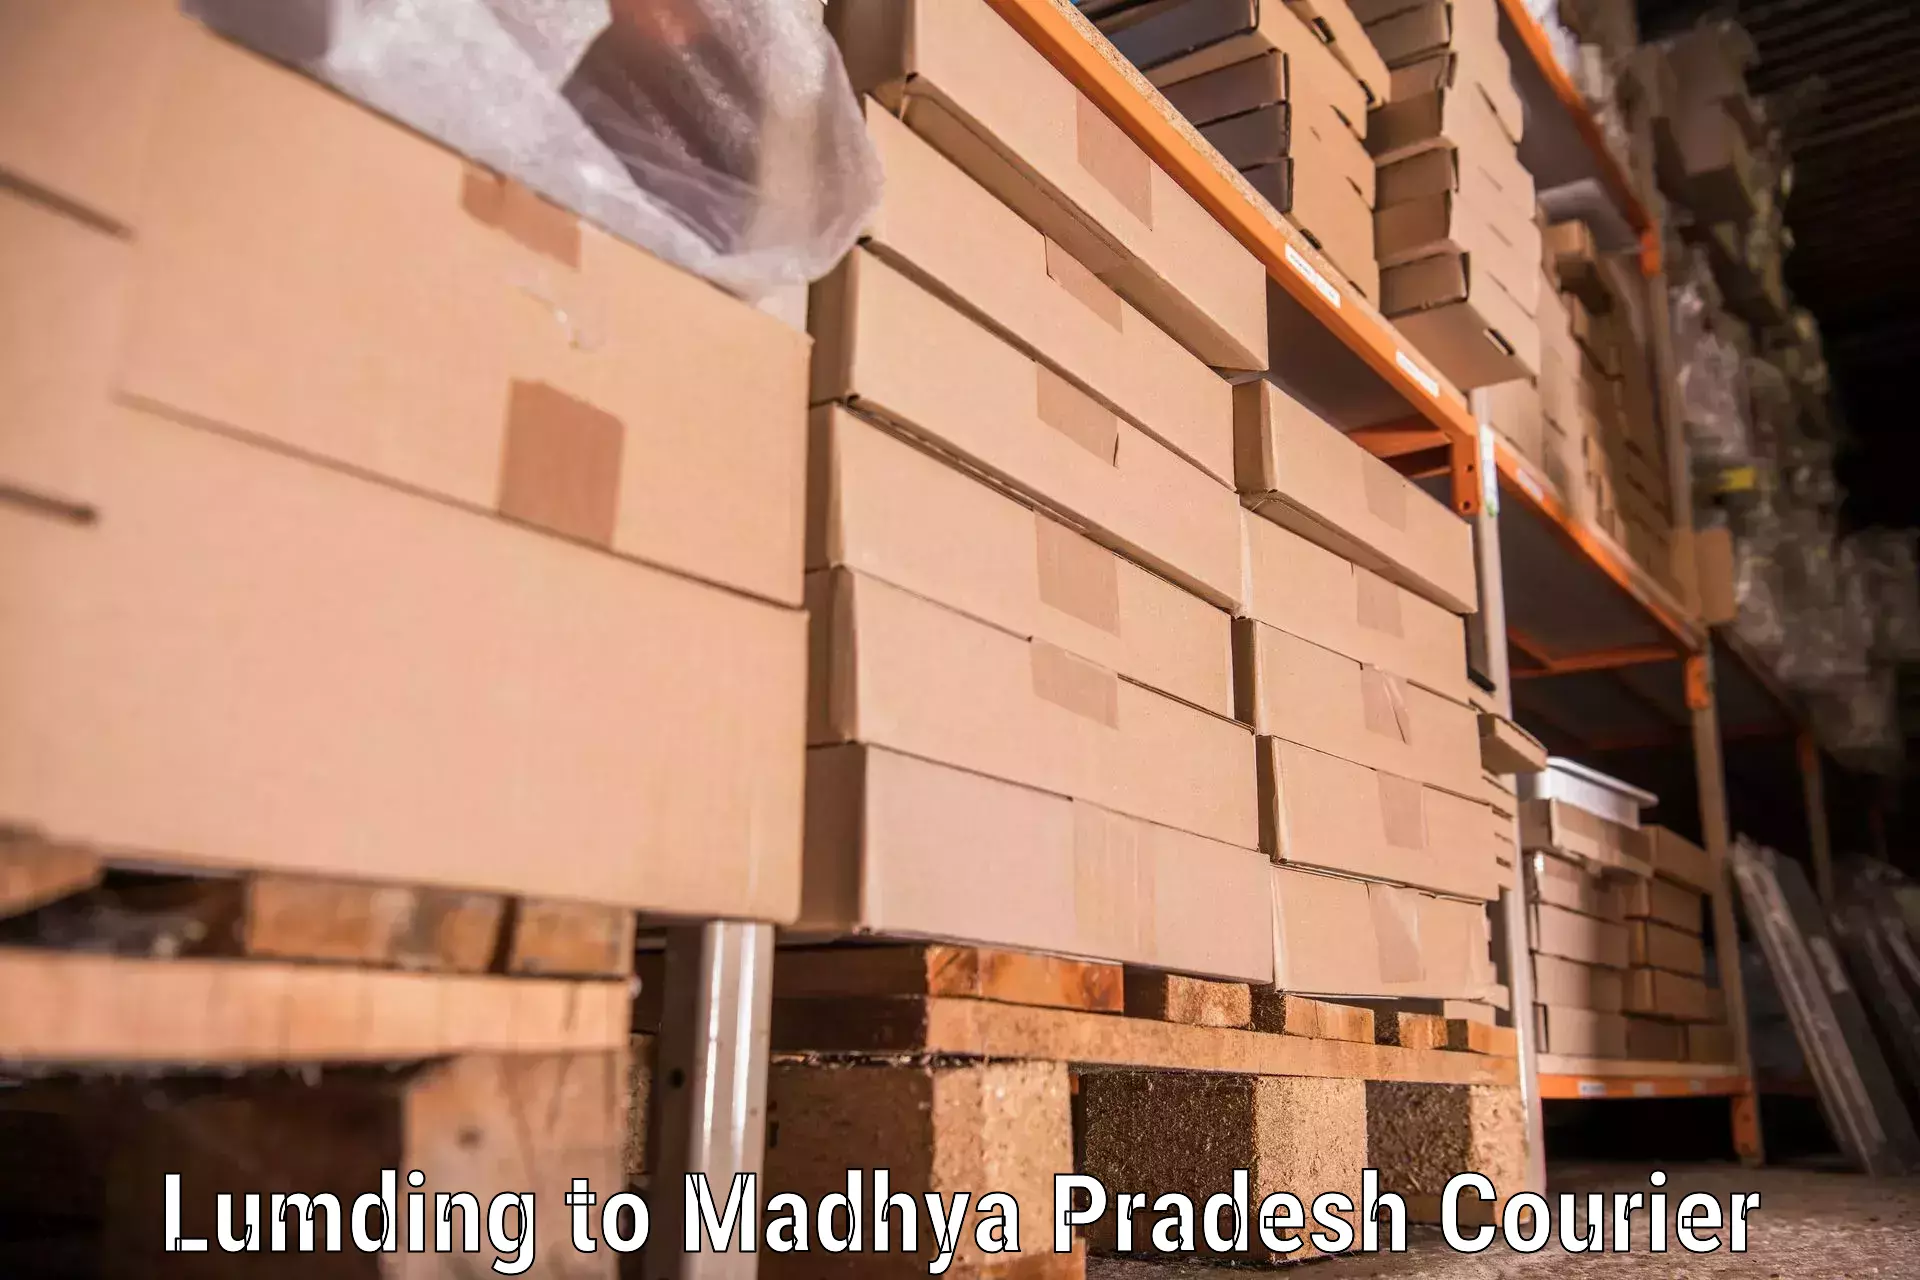 Specialized moving company Lumding to Khandwa